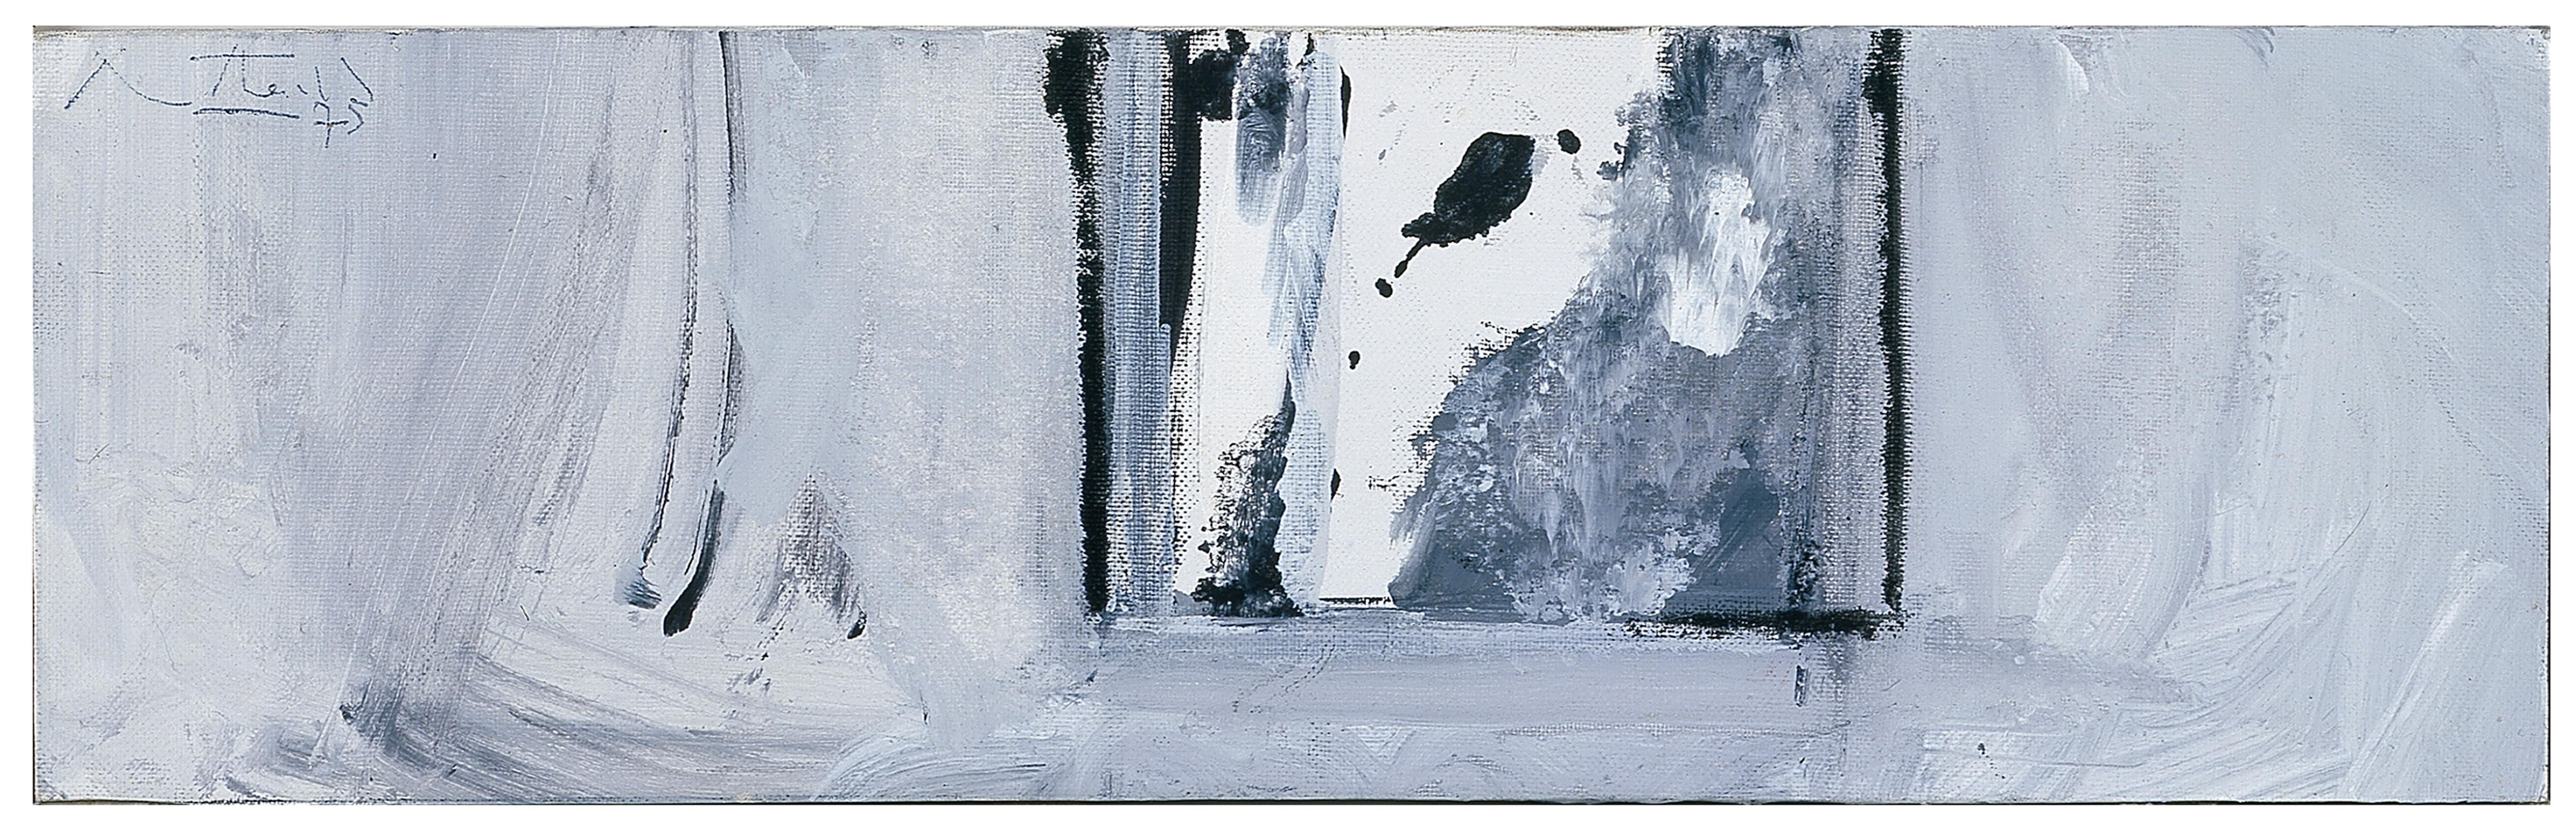 Abstract Painting Robert Motherwell - Étude Country Study du Dr. Zhivago